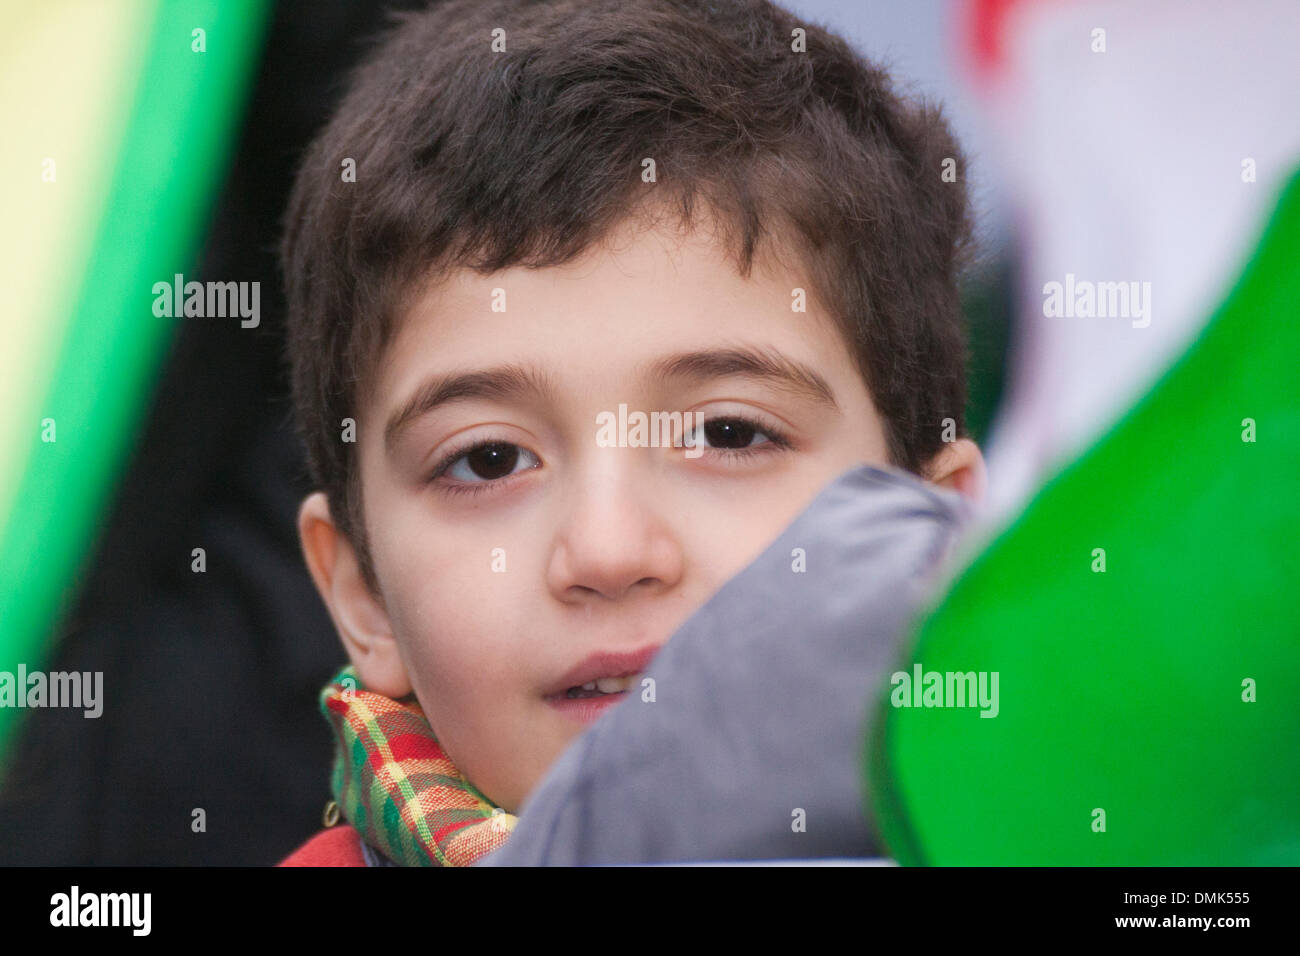 London, UK. 14th December 2013. A small boy peers out from between flags as Kurds demand that the Kurdish issue in Syria is added to the agenda of the January 2014 Geneva II peace conference. Credit:  Paul Davey/Alamy Live News Stock Photo